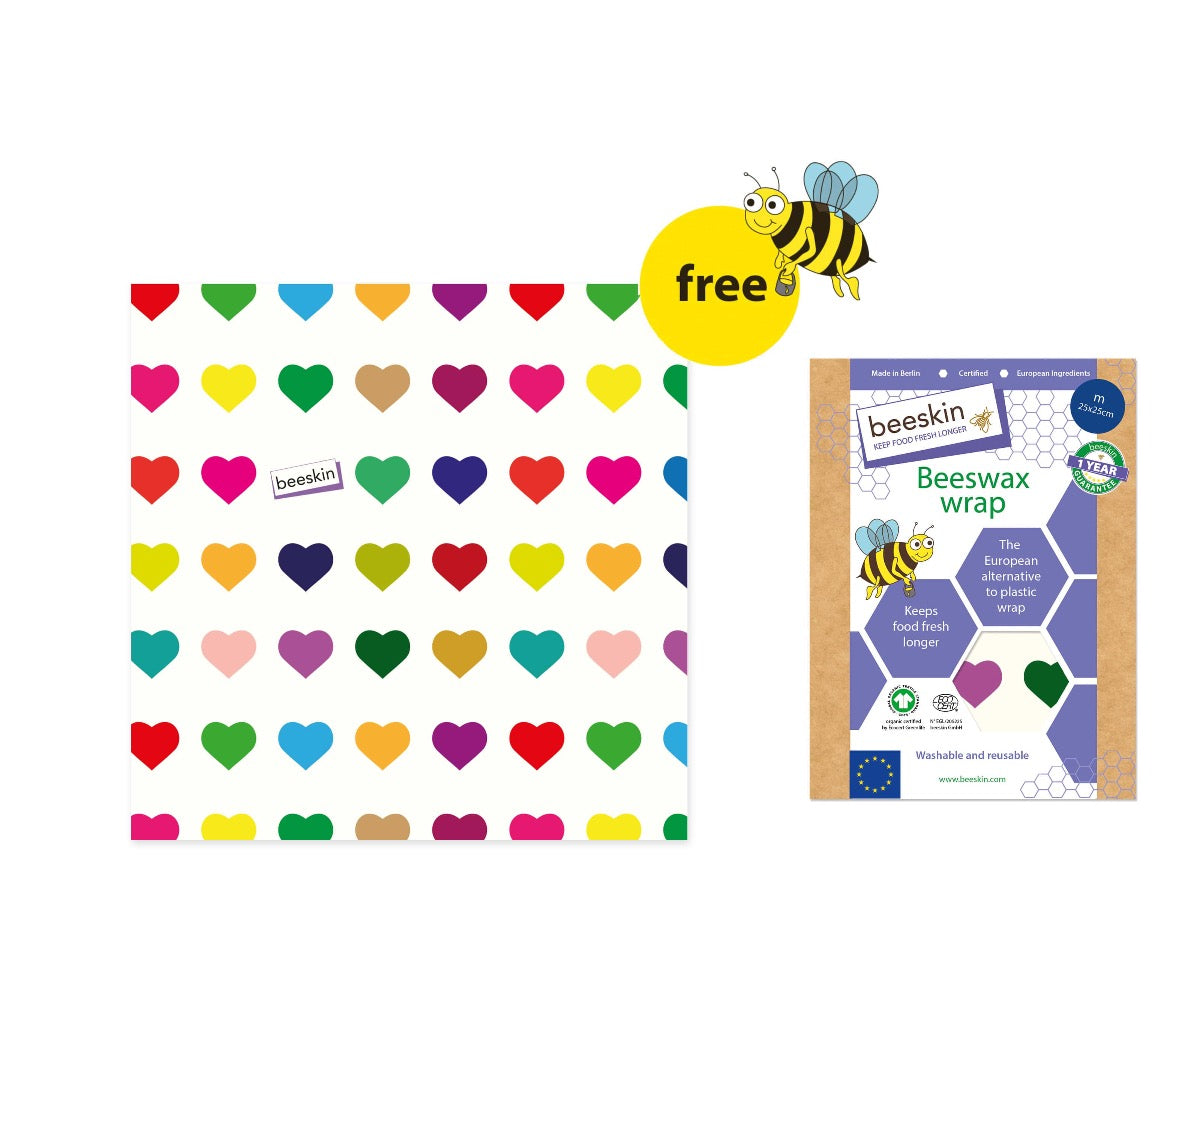 beeskin beeswax wrap colorful hearts and a big yellow button free with a funny bee next to packaging